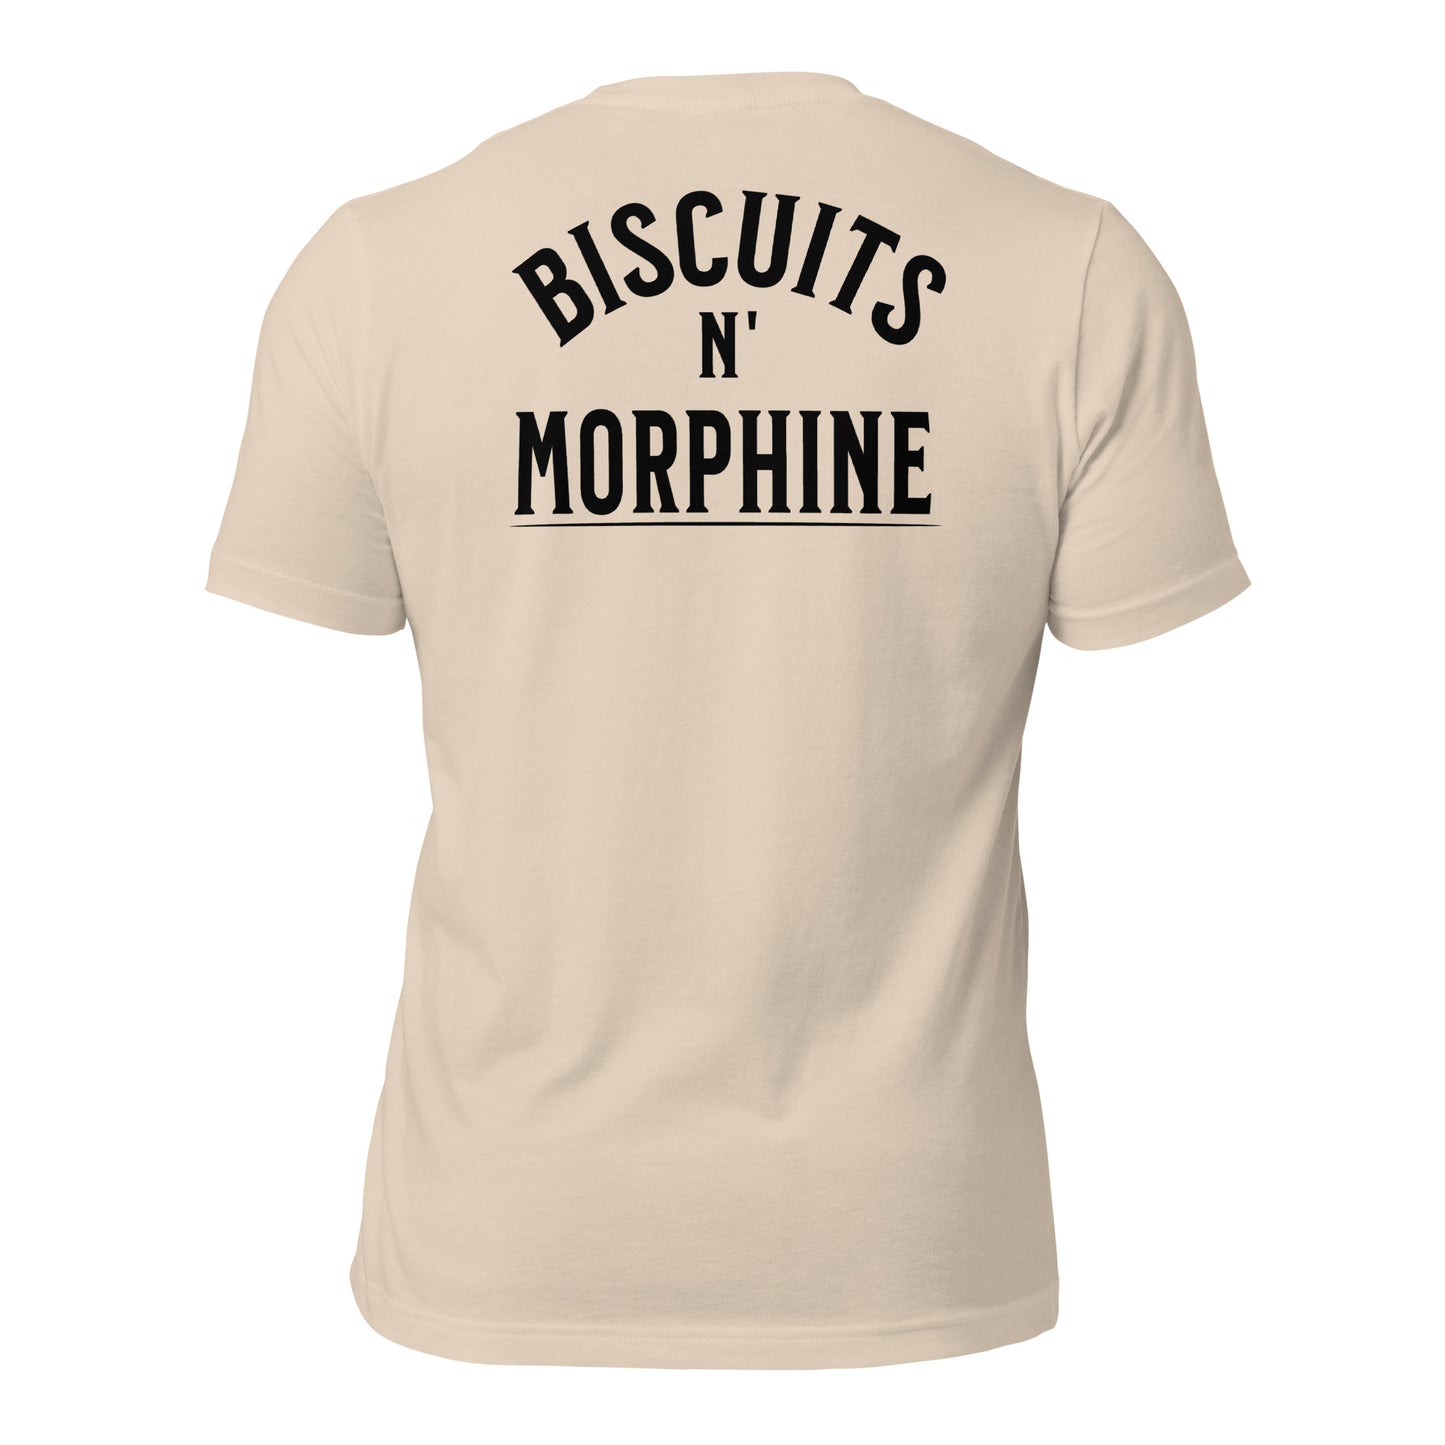 Biscuits N' Morphine